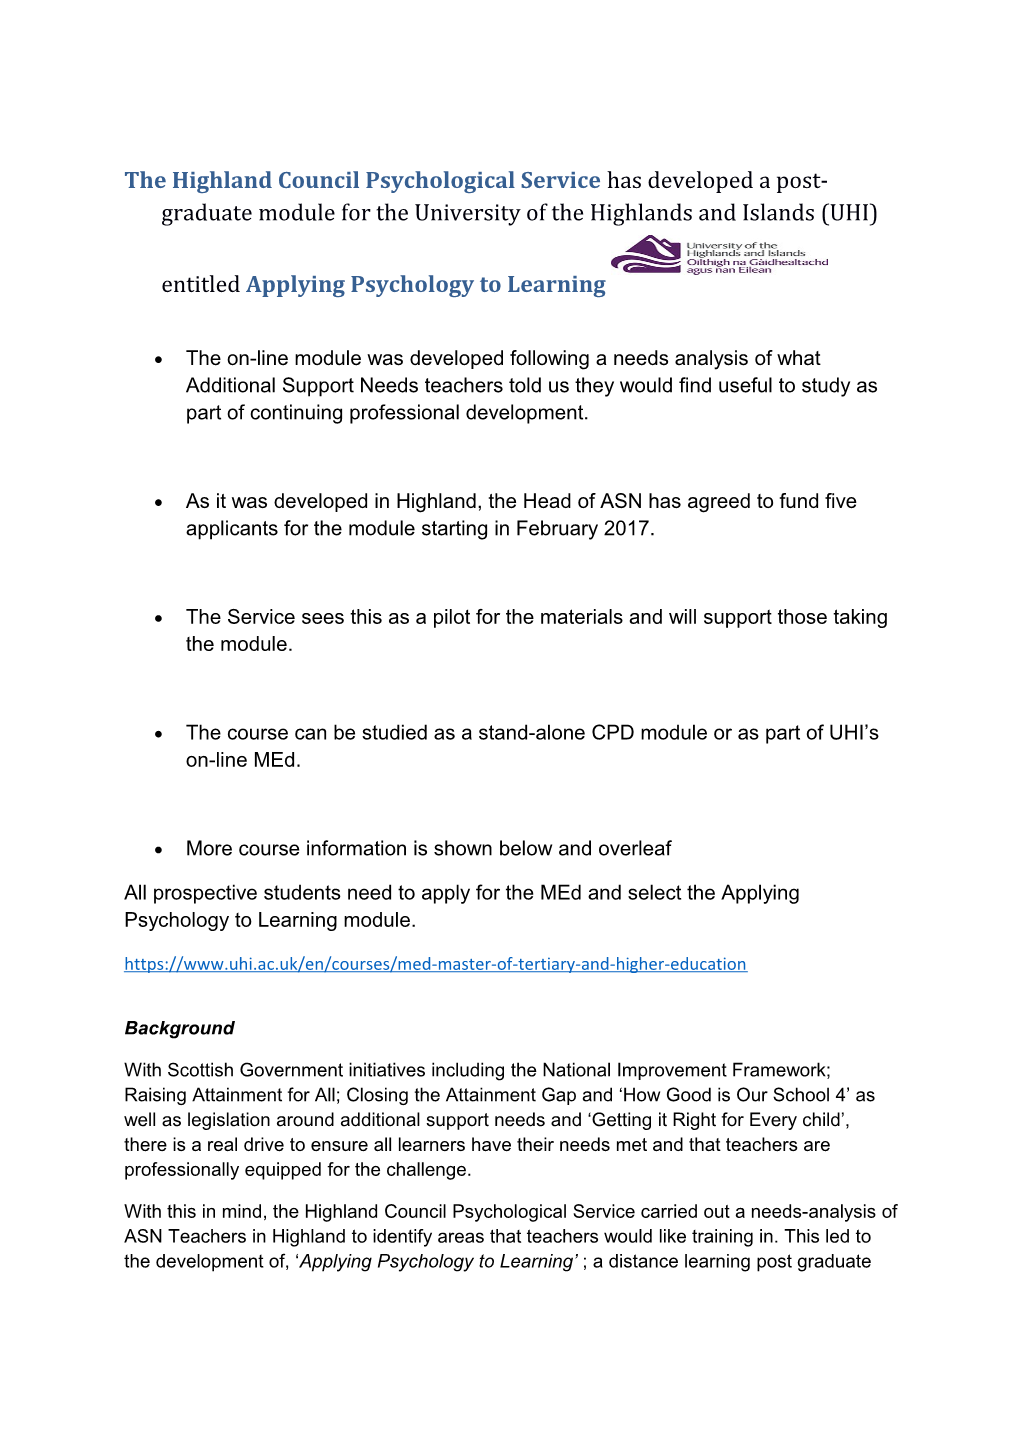 The Highland Council Psychological Service Has Developed a Post-Graduate Module for The